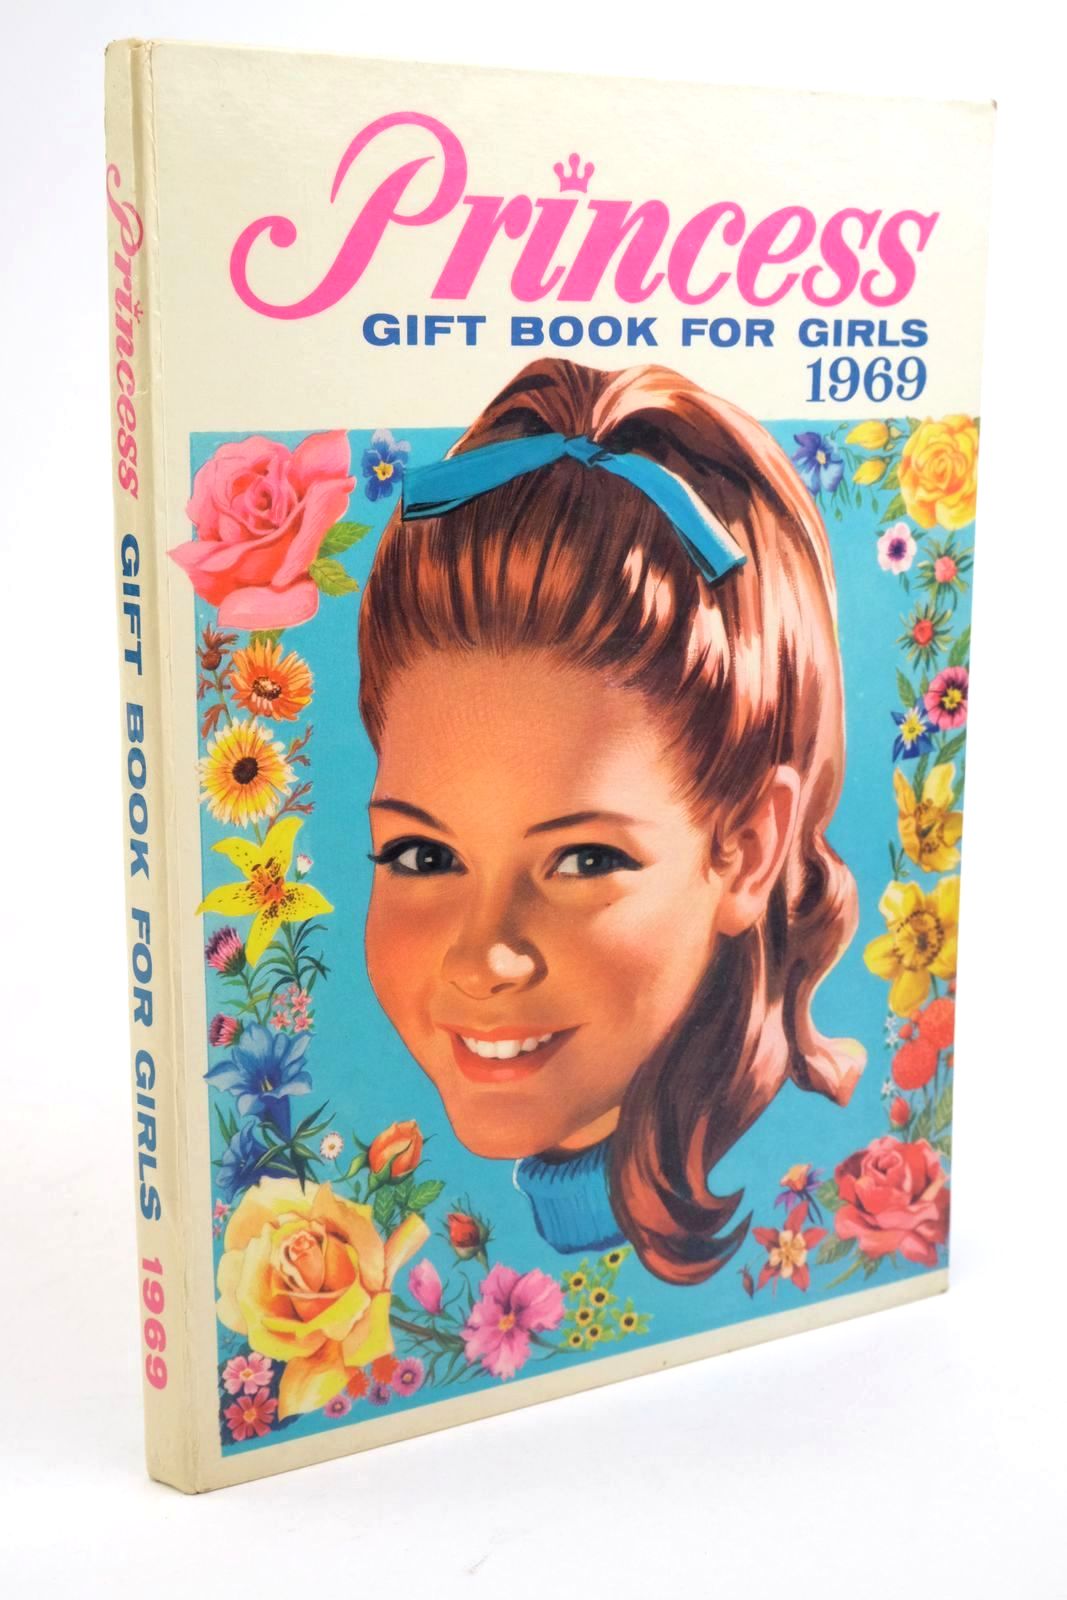 Photo of PRINCESS GIFT BOOK FOR GIRLS 1969 published by Fleetway Publications Ltd. (STOCK CODE: 1322068)  for sale by Stella & Rose's Books